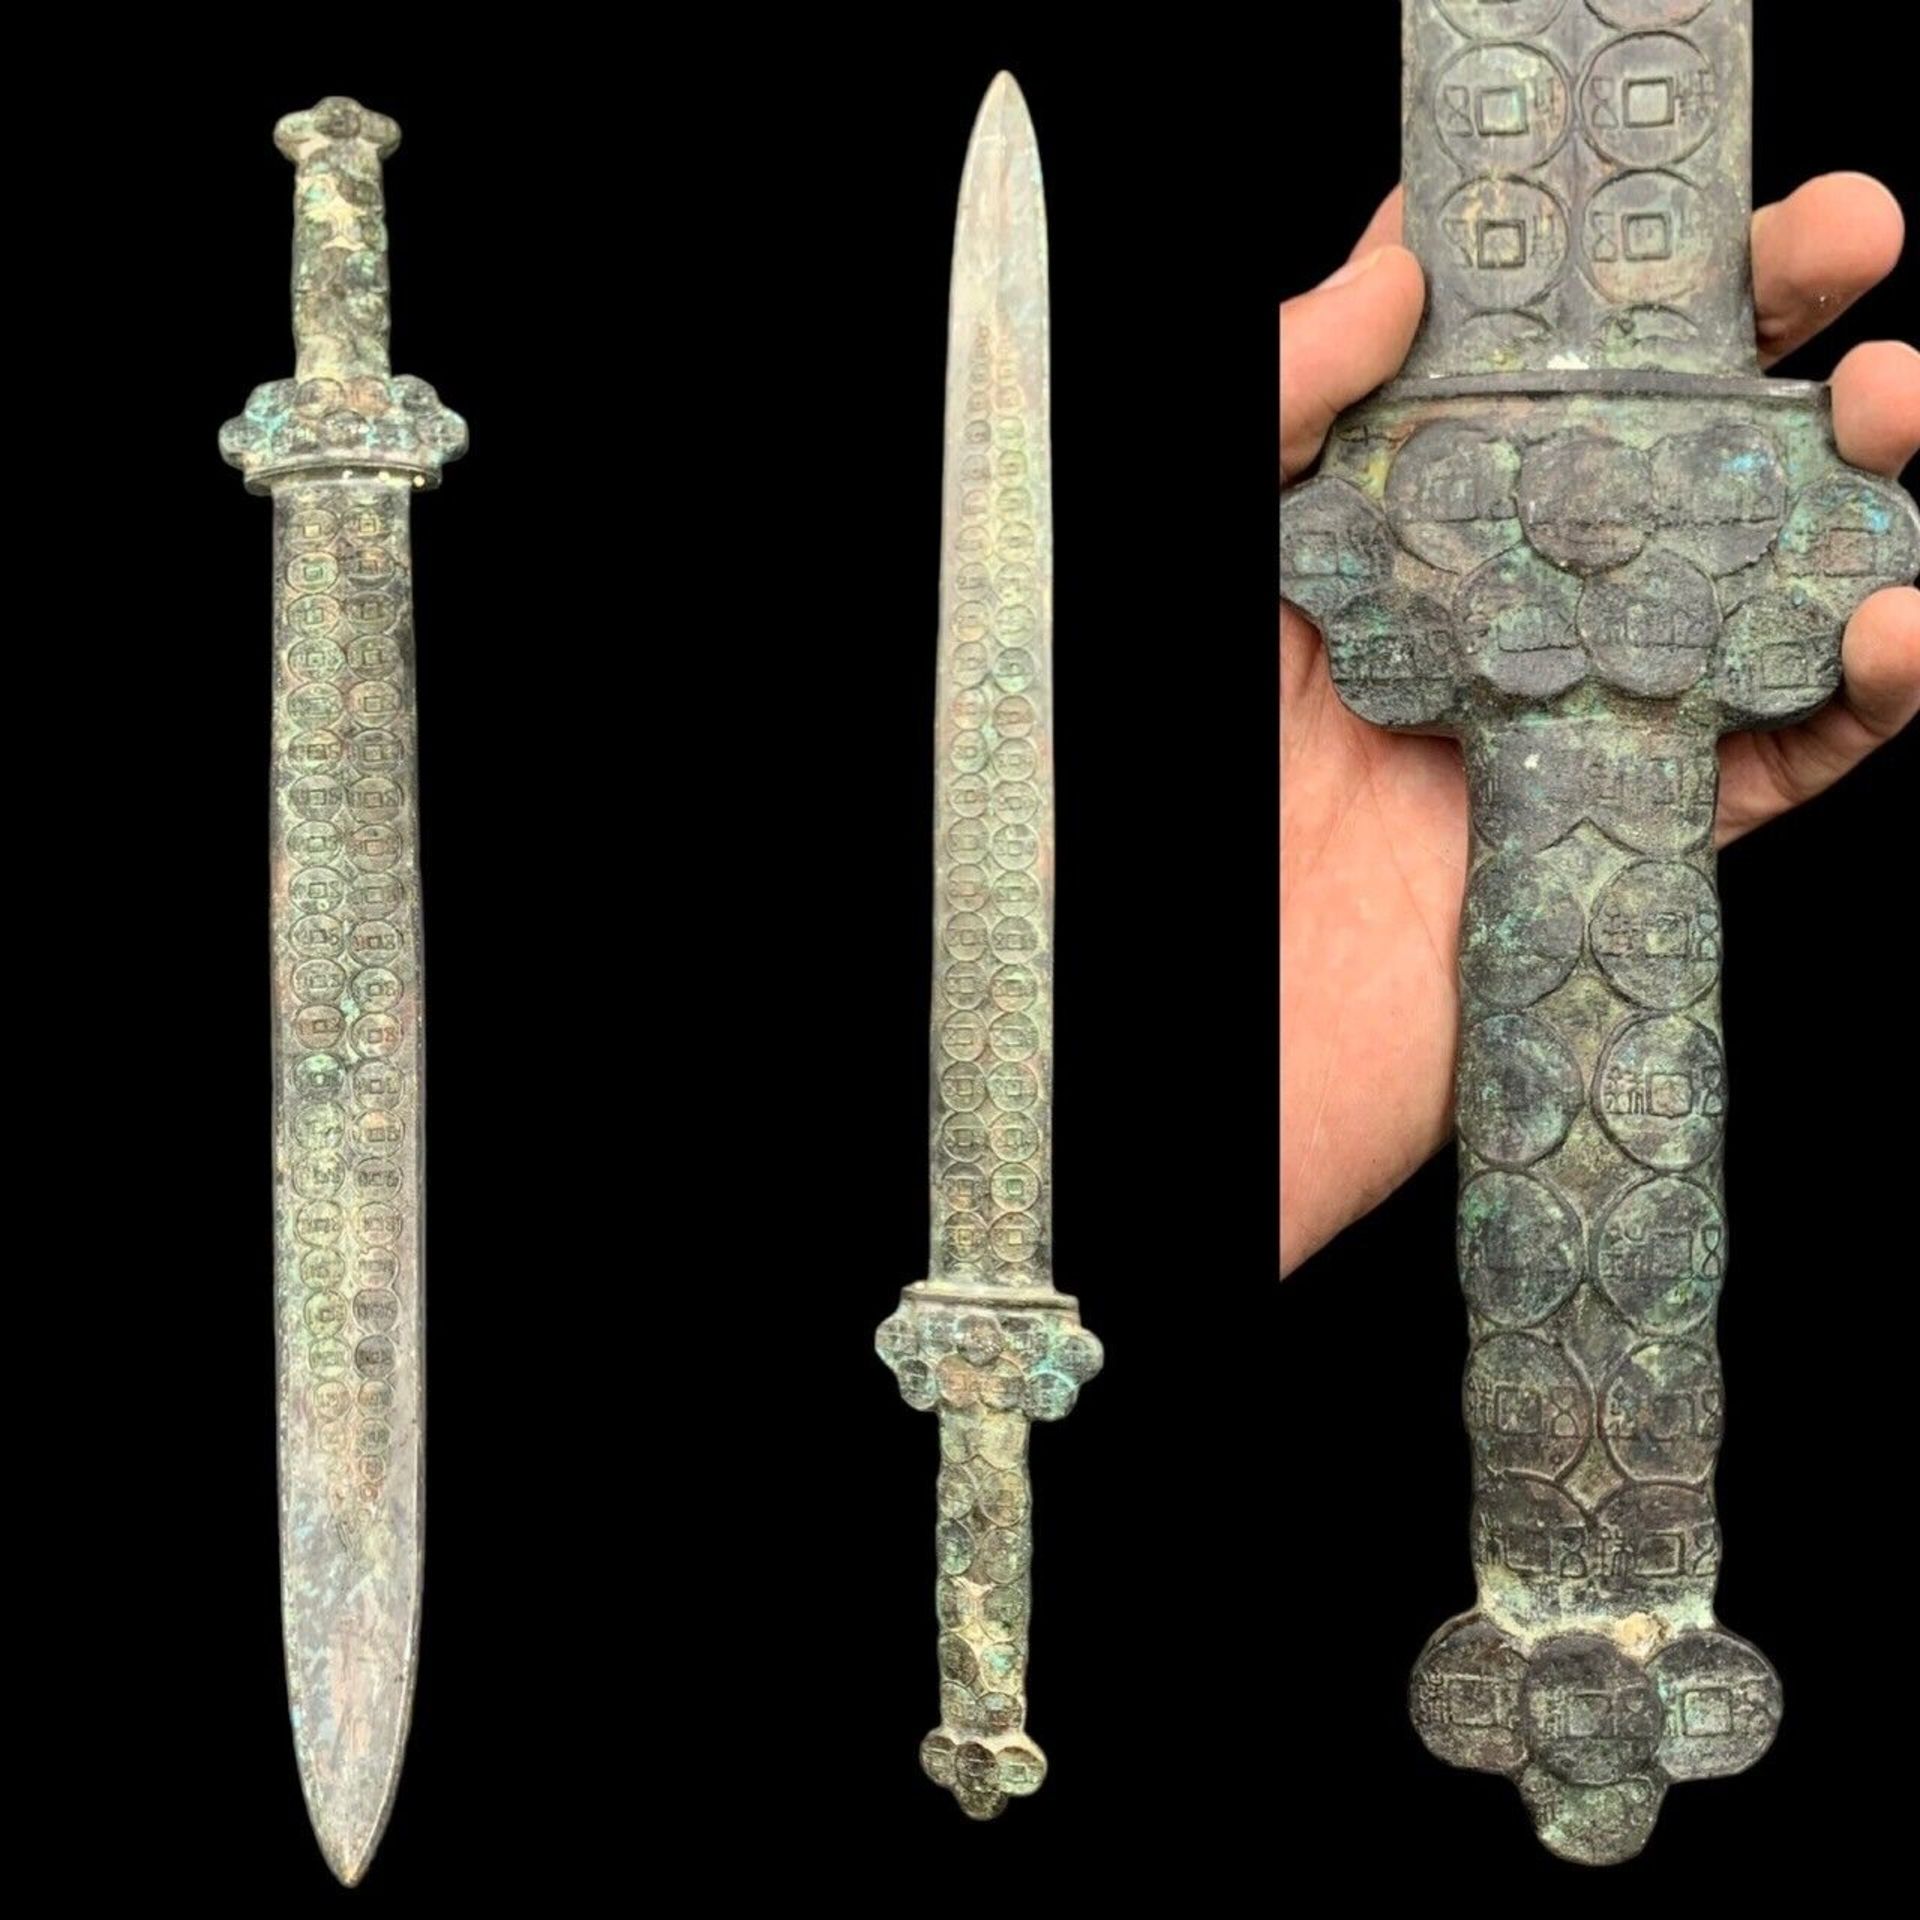 Incredible Rare Handcrafted Art Antique Asian Wonderful Bronze Sword - Image 3 of 9